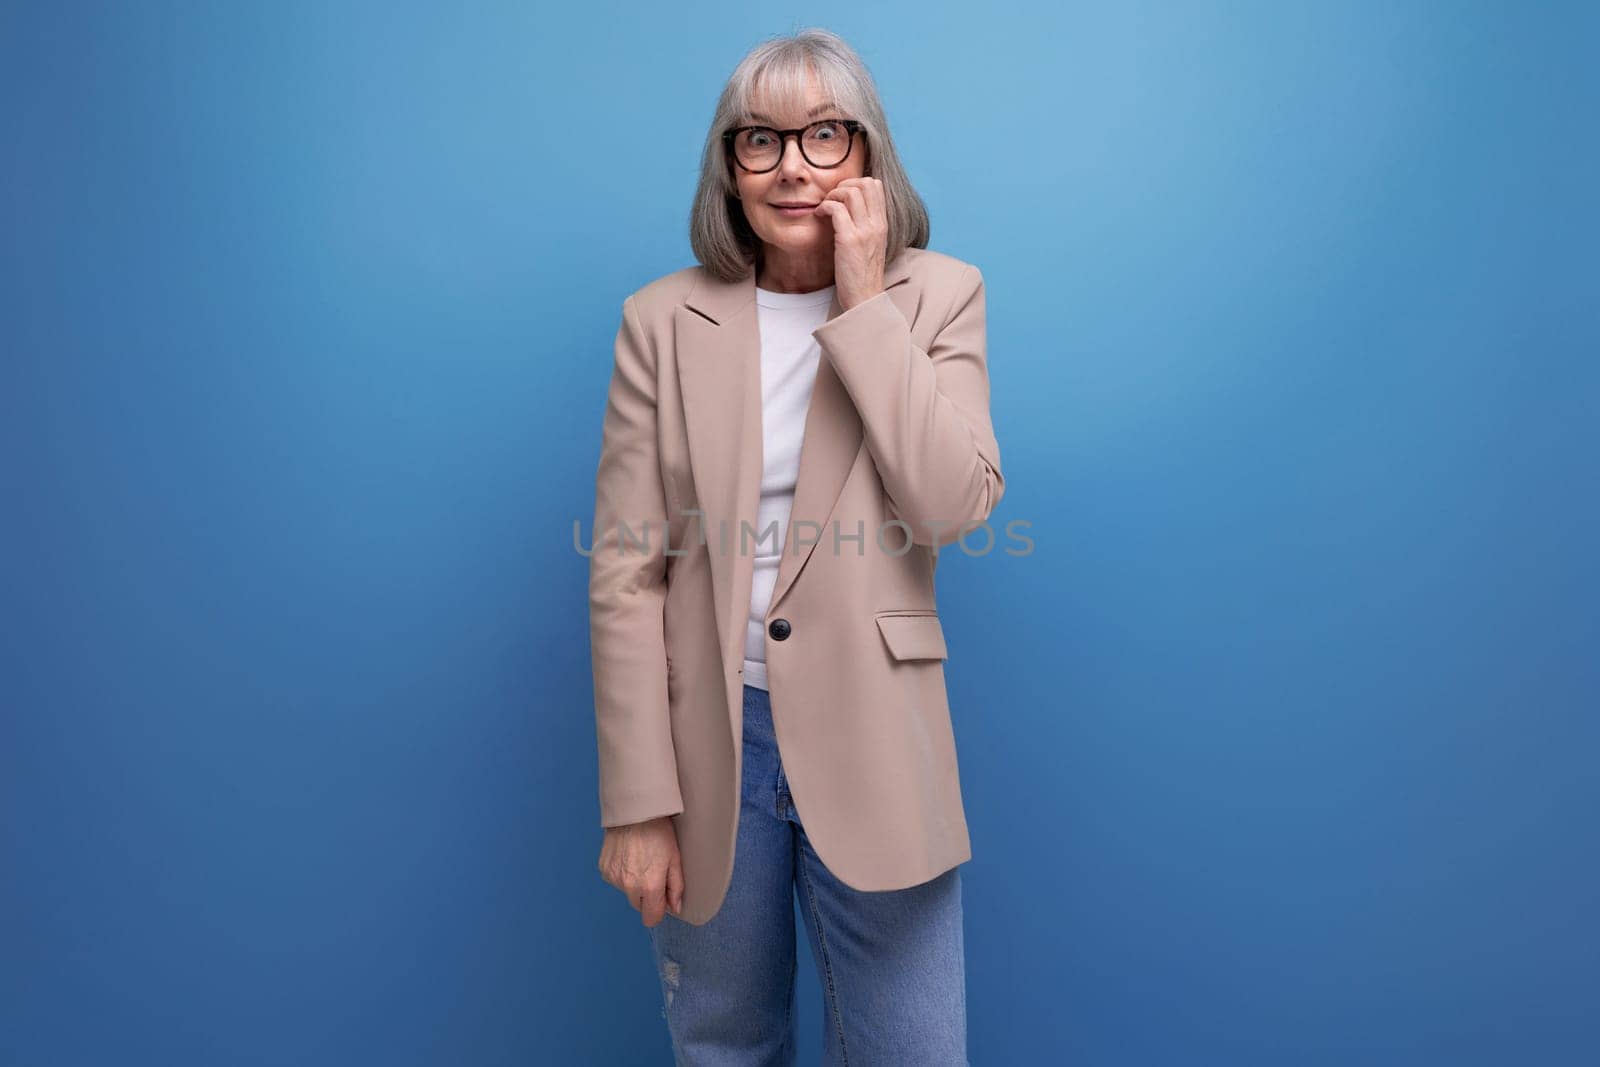 a middle-aged business woman in a stylish look stands thoughtfully on a studio background with copy space.